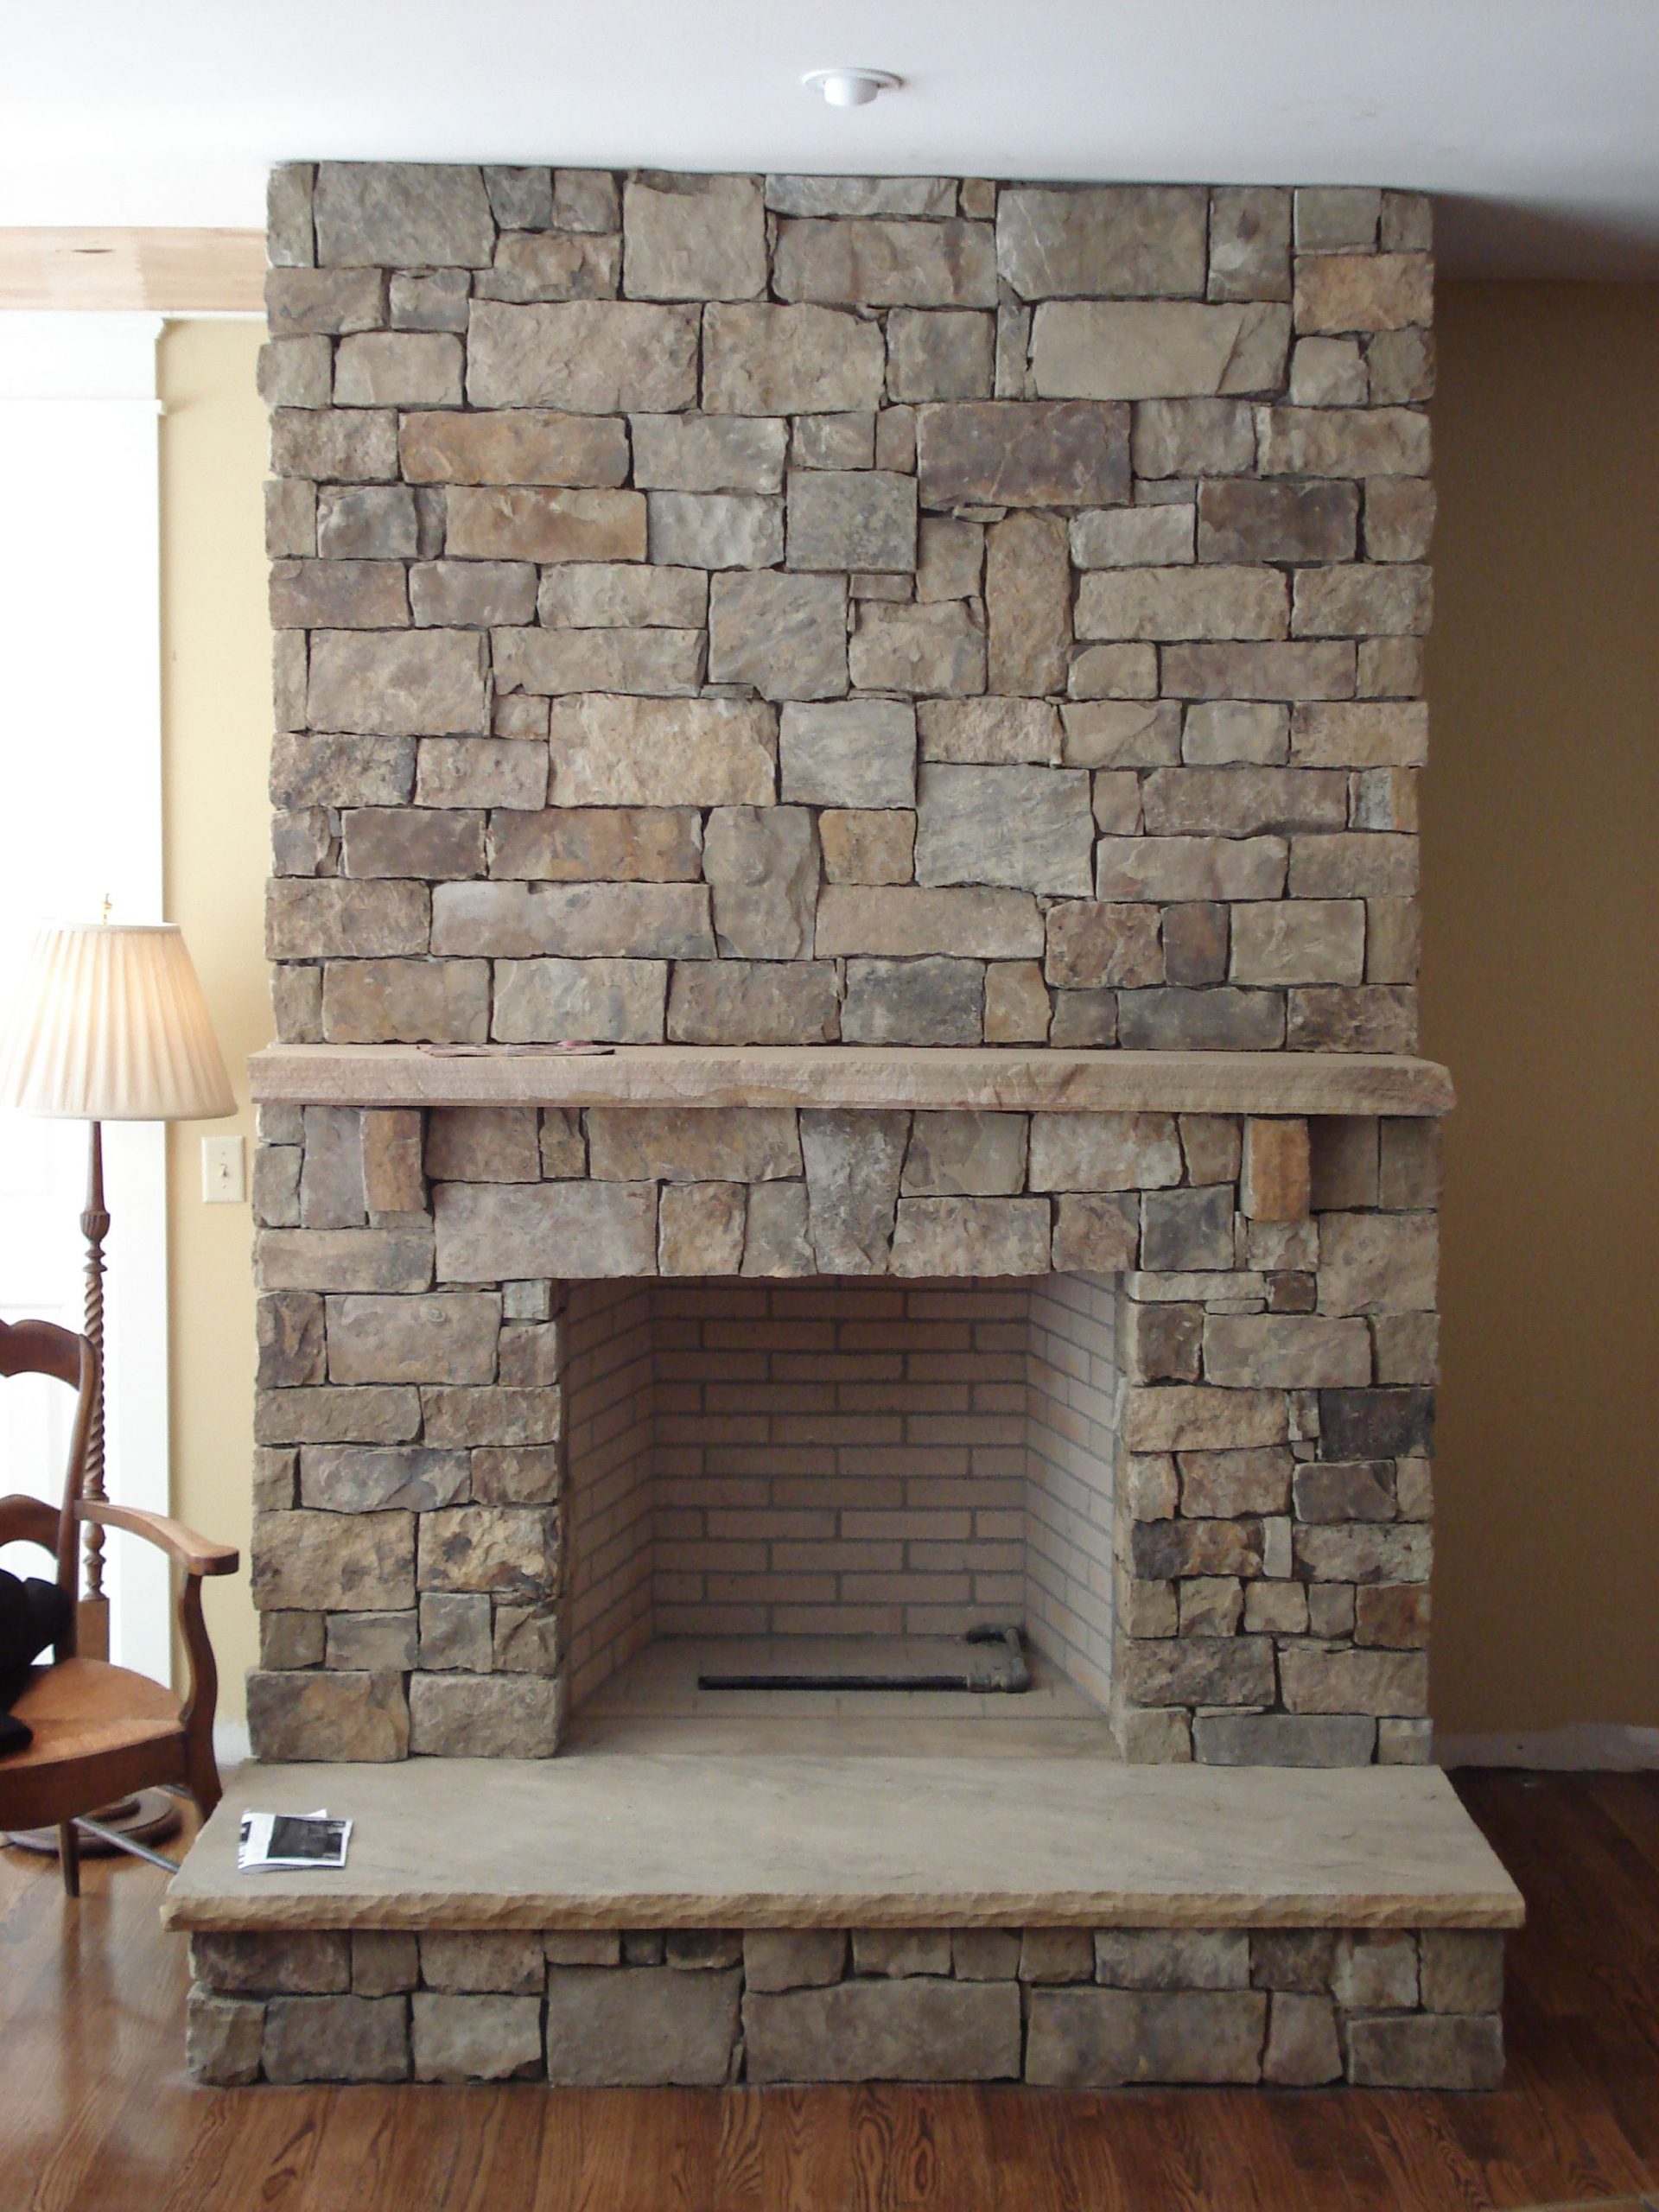 Where to Buy Fireplace Hearth Stone Lovely Natural Stone Fireplaces